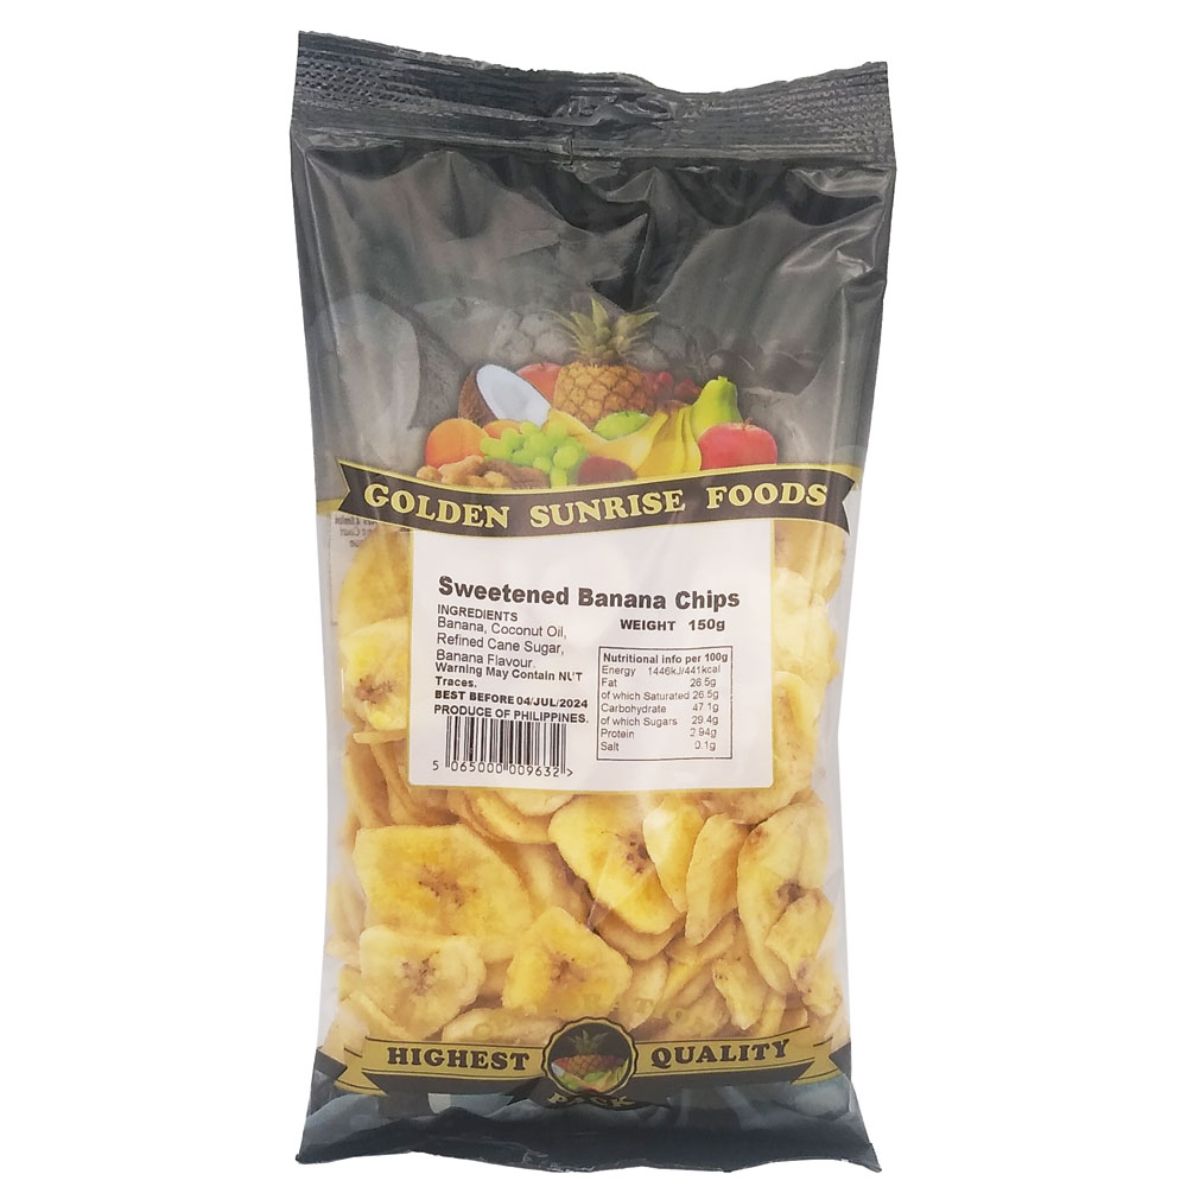 Sentence with replacement: Package of Golden Sunrise Foods - Sweetened Banana Chips - 150g.